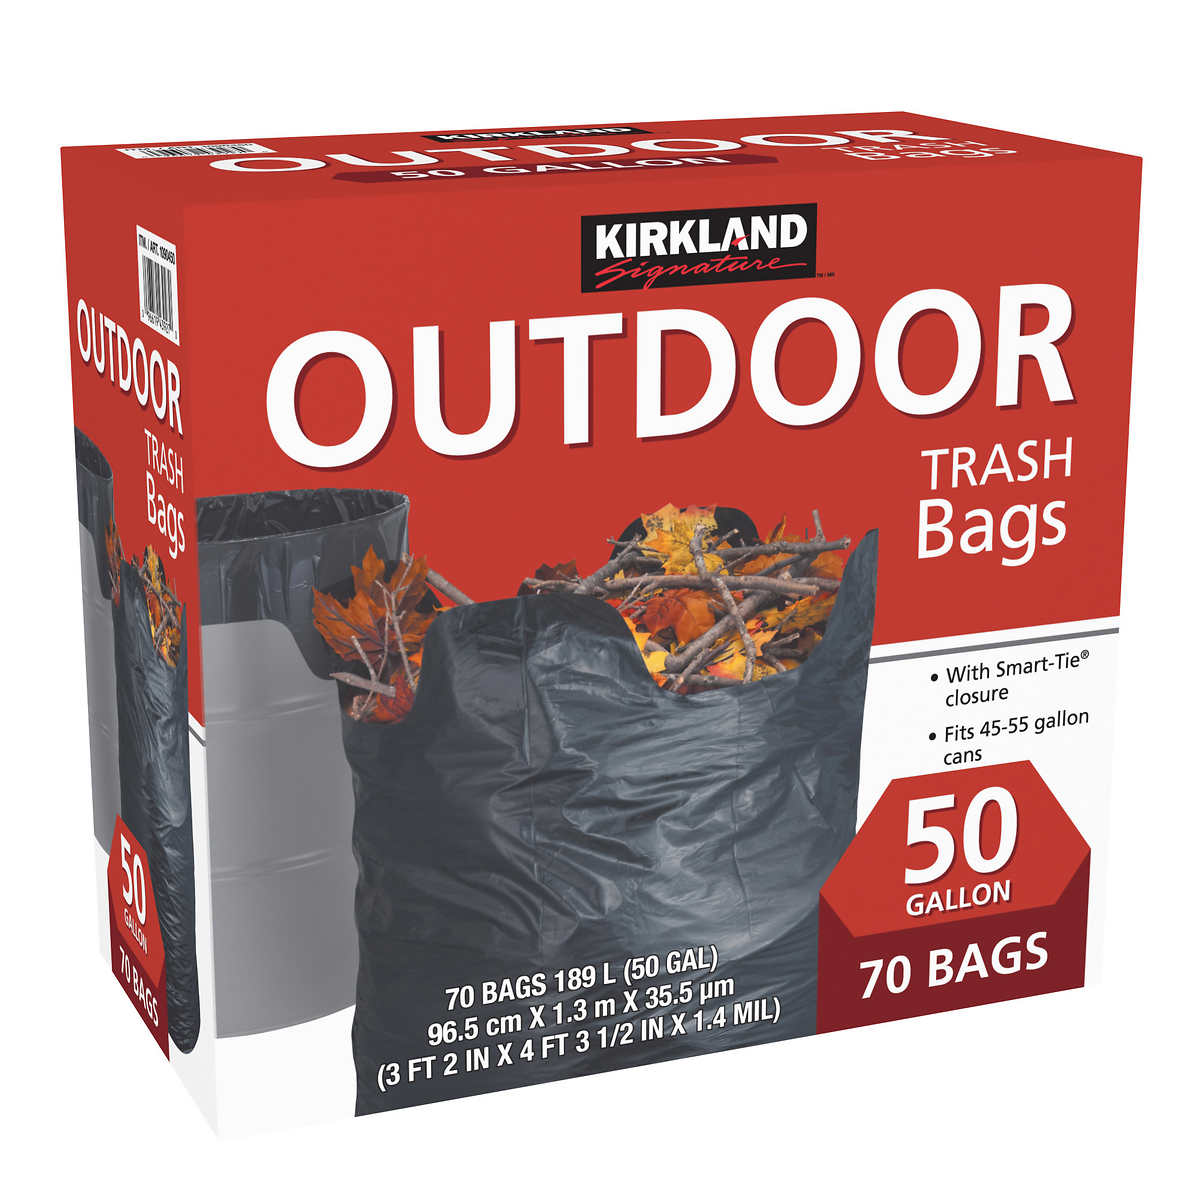 Costco+30+Gallon+Paper+Yard+Waste+Bags+3+Count for sale online